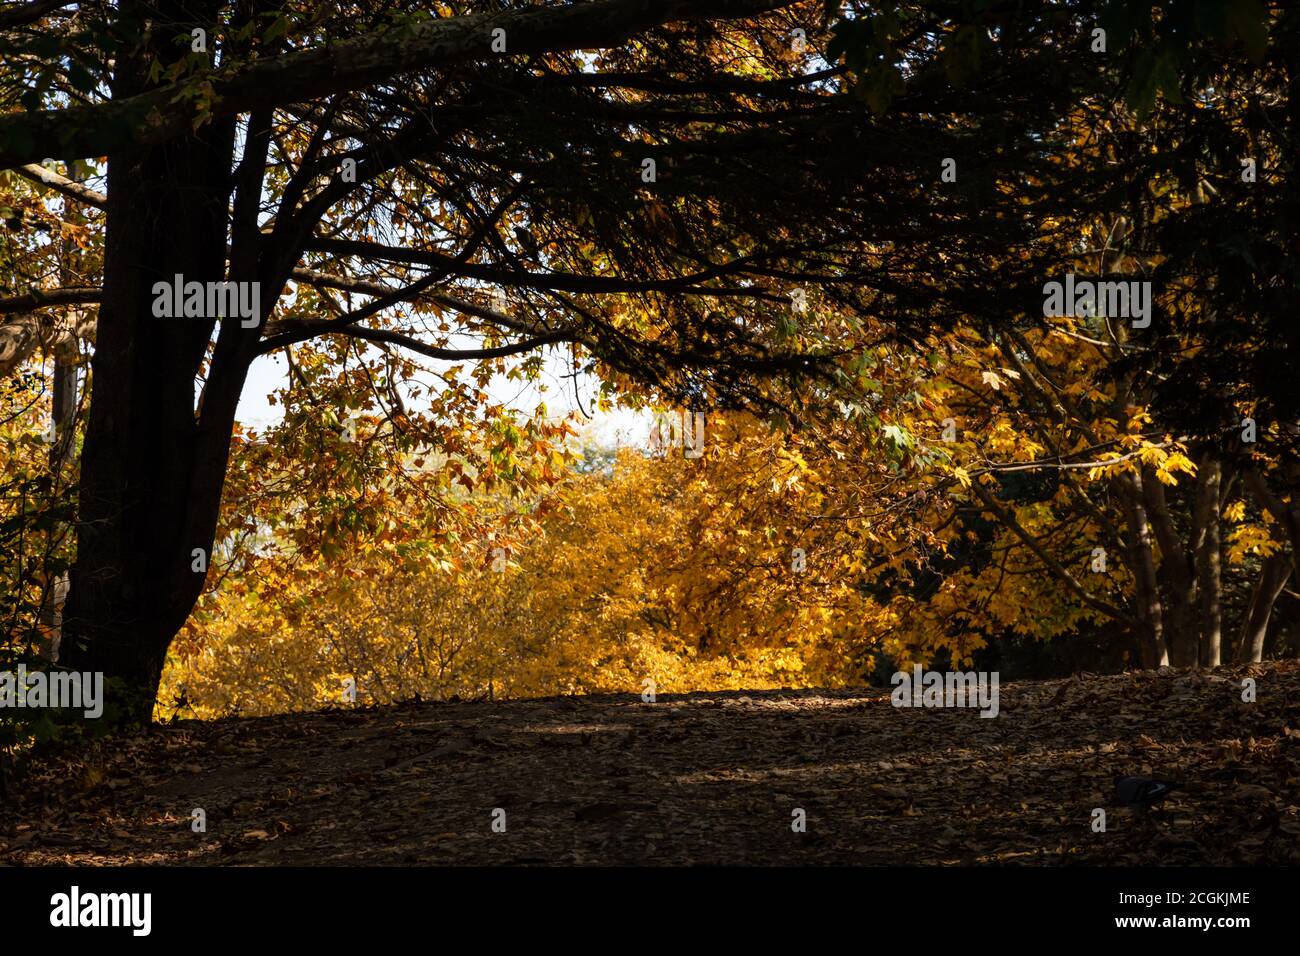 Alley in the Park in autumn. Horizontal frame with the yellow trees and the sidewalk. A walk in the autumn Park. Natural autumn background. Landscape Stock Photo